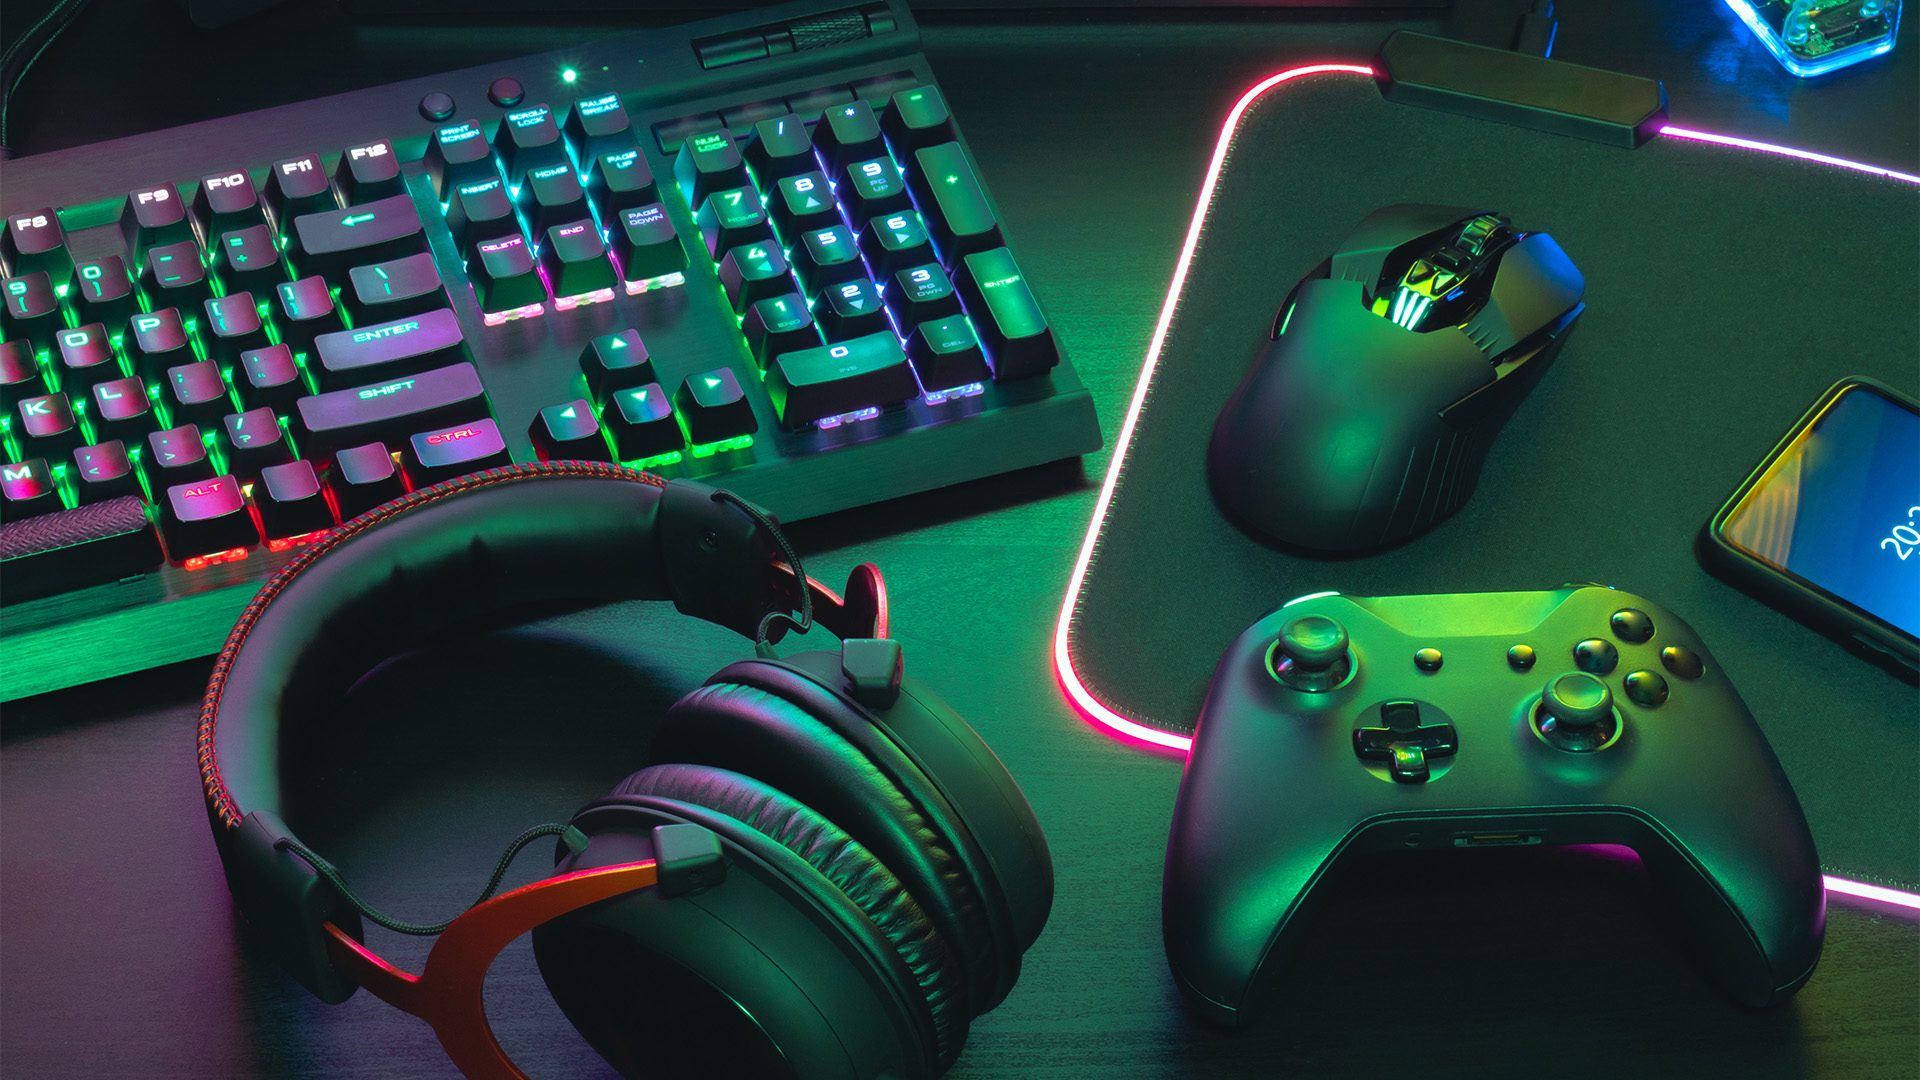 Online gaming desk setup with mouse, controller, headphones and keyboard with neon lighting